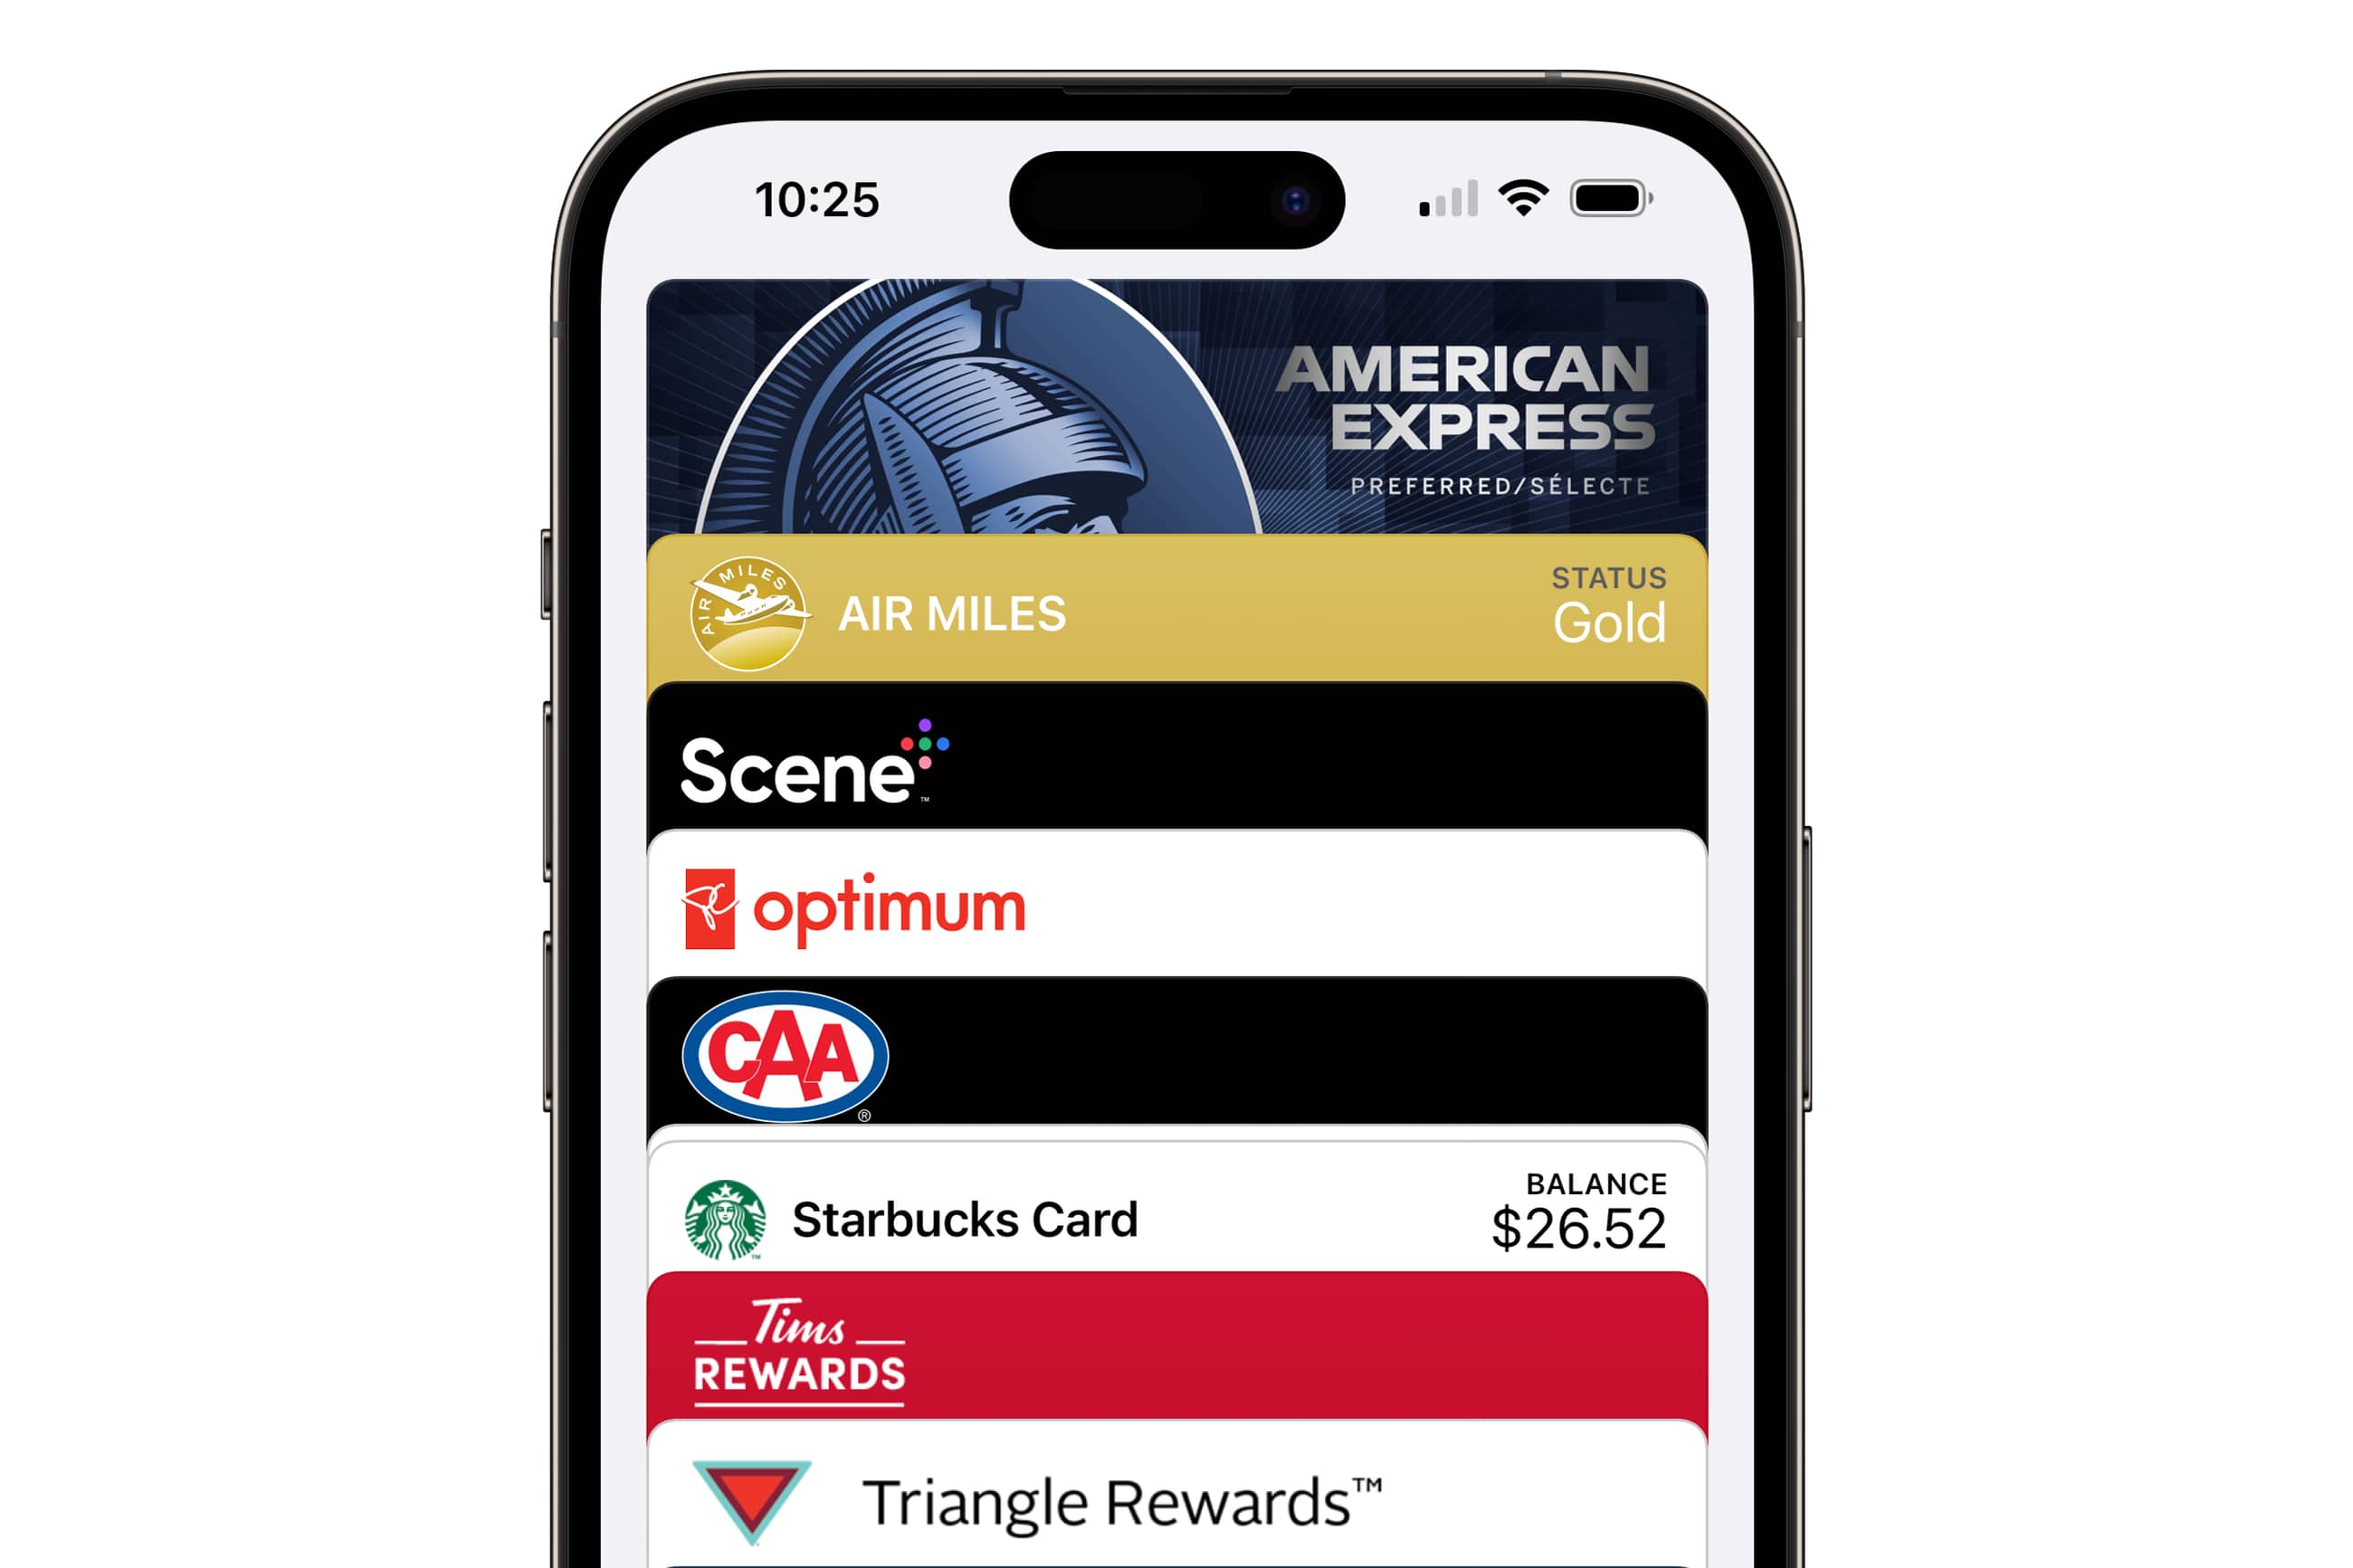 How to Add Walmart Gift Card to Apple Wallet? 2